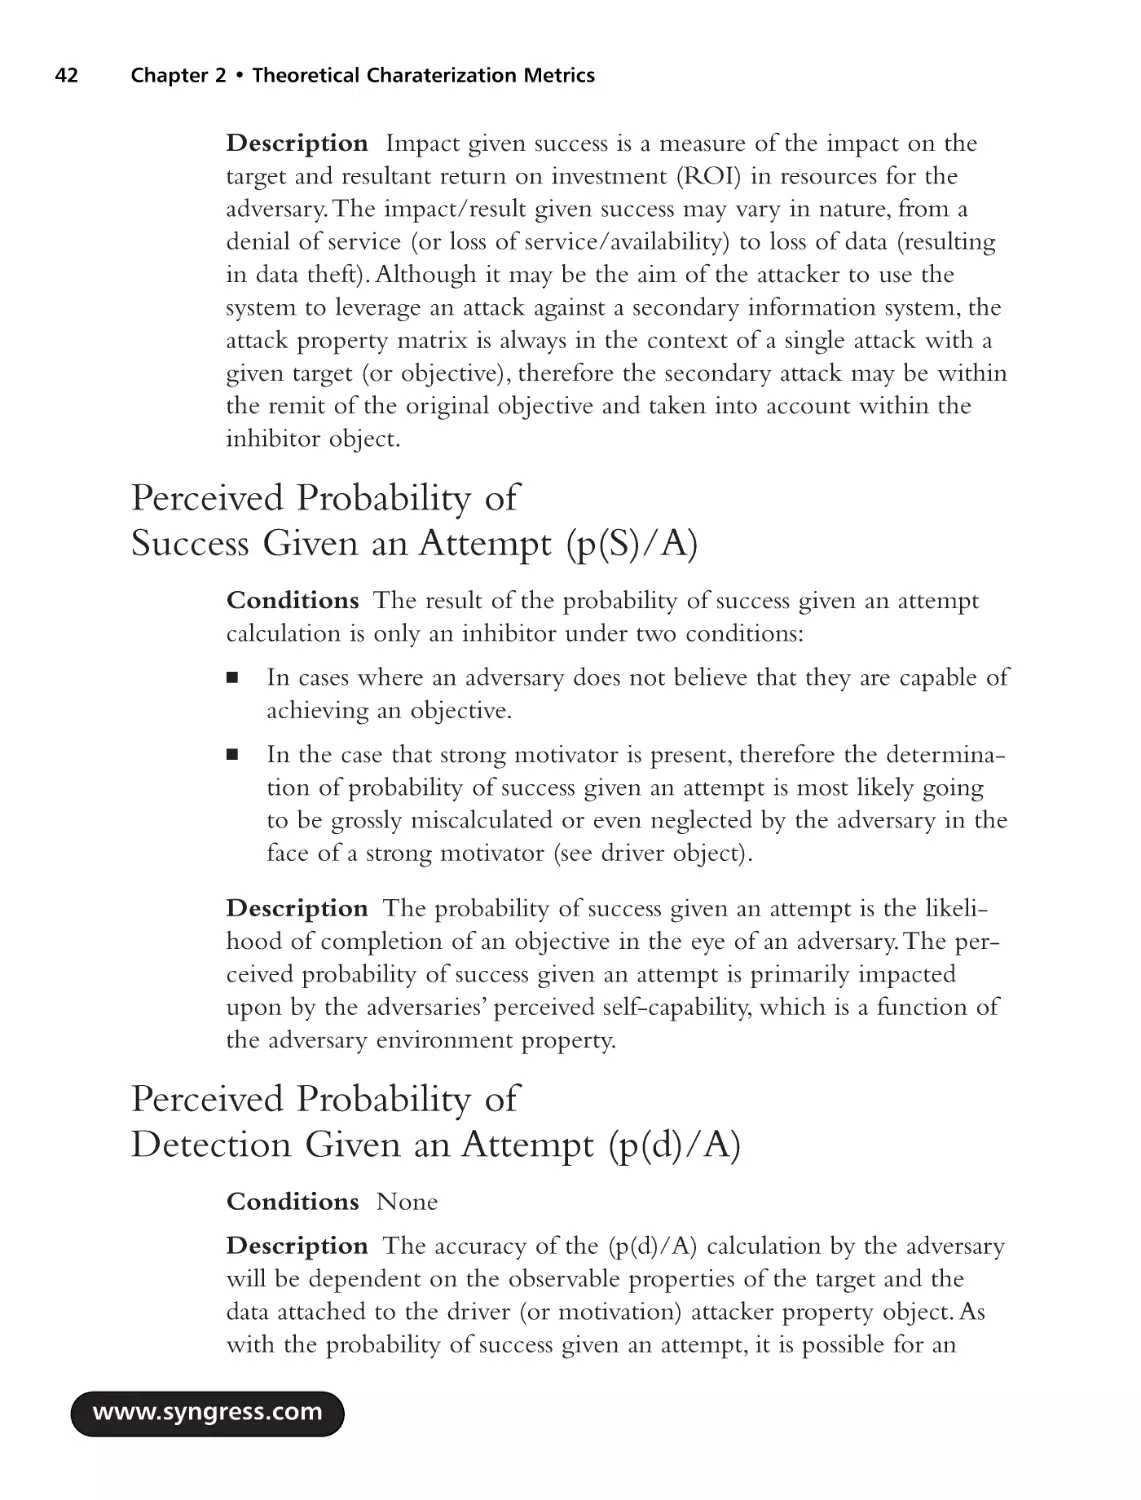 Perceived Probability of Success Given an Attempt (p(S)/A)
Perceived Probability of Detection Given an Attempt (p(d)/A)